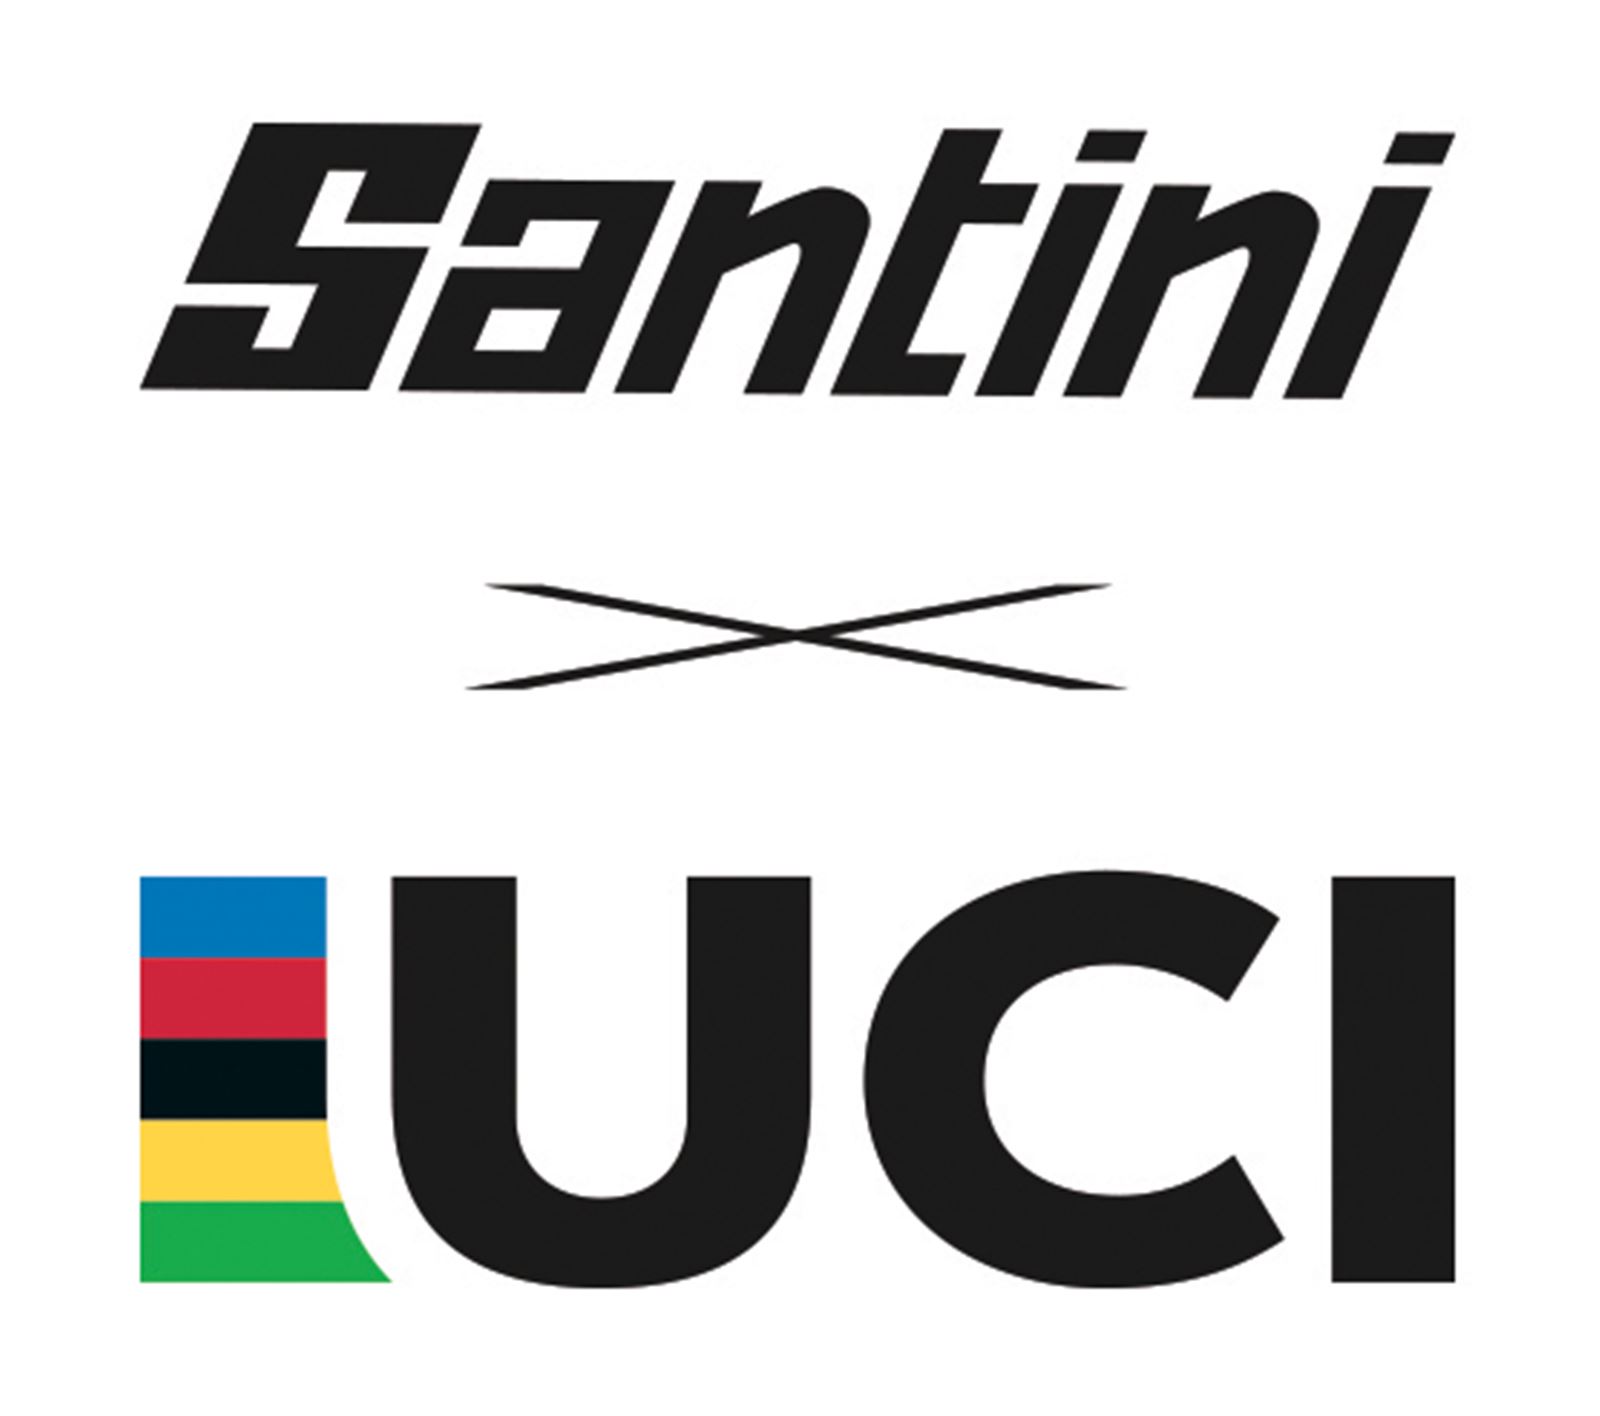 SANTINI X UCI OFFICIAL